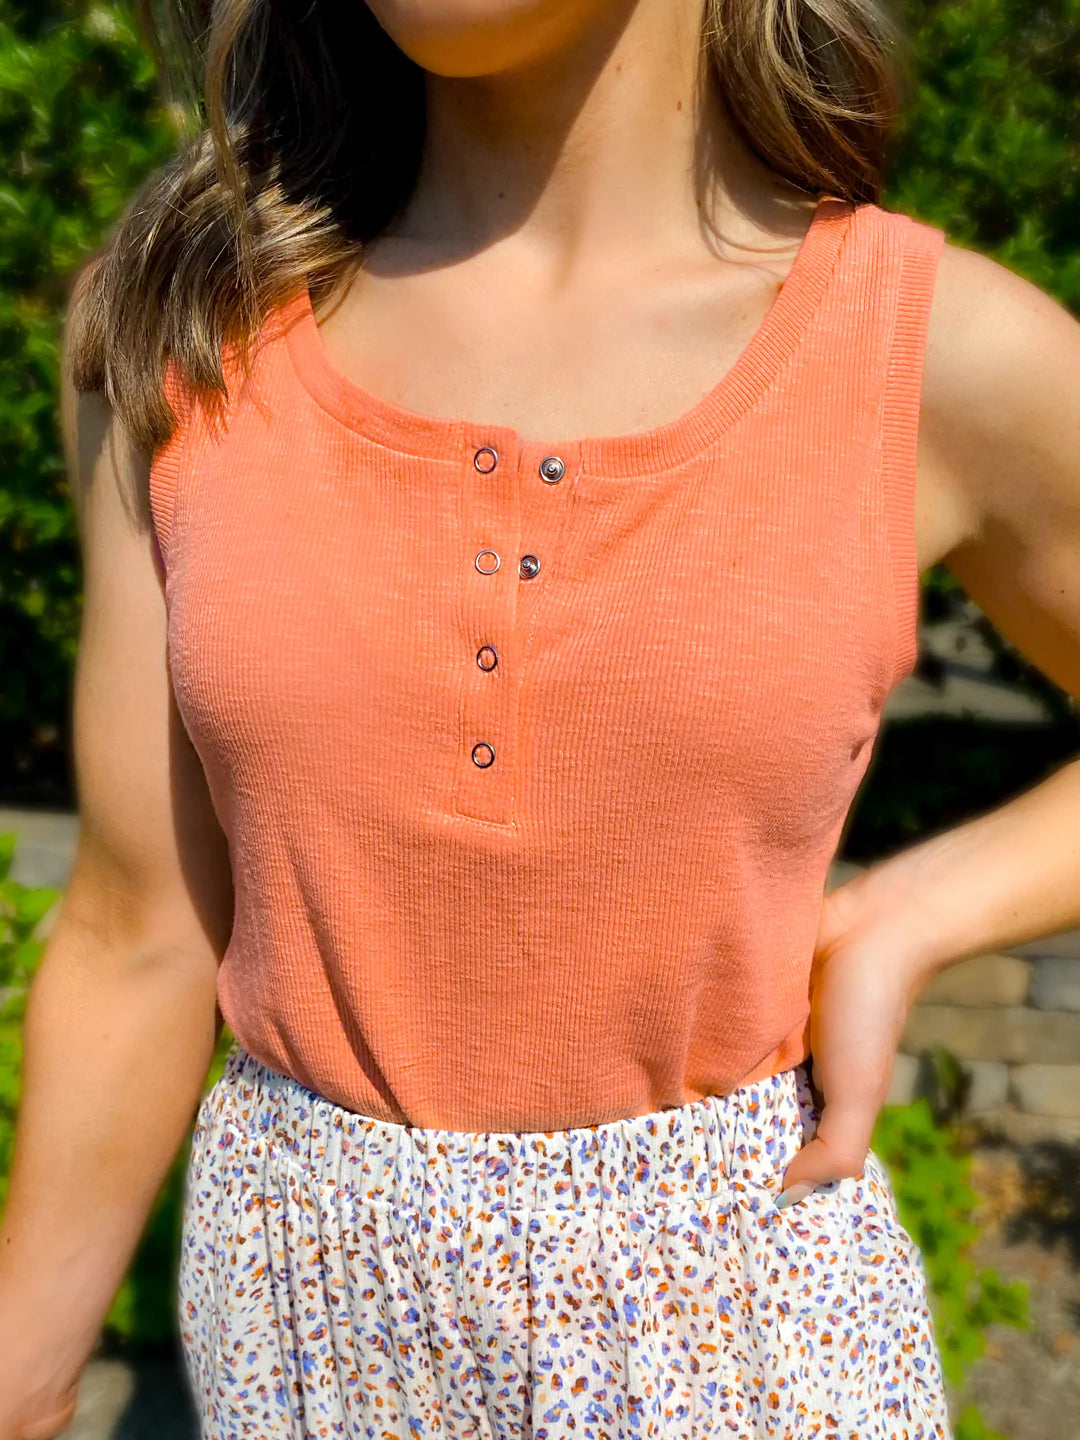 The Pippa top